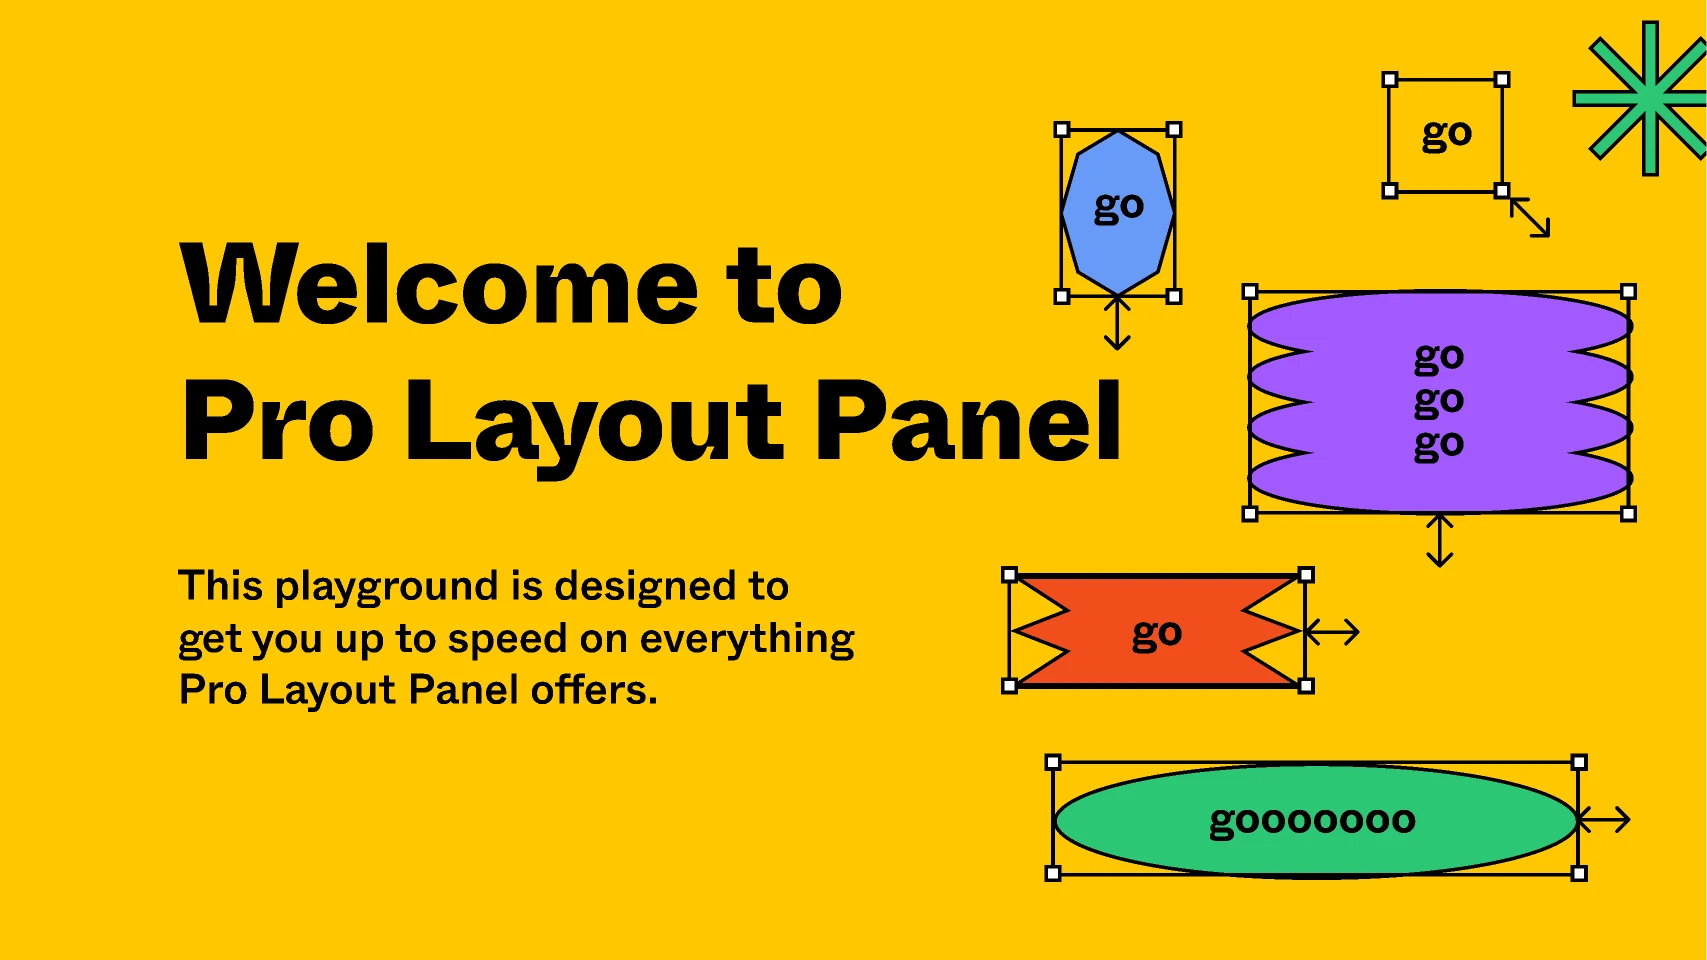 Pro Layout Panel Playground for Figma and Adobe XD